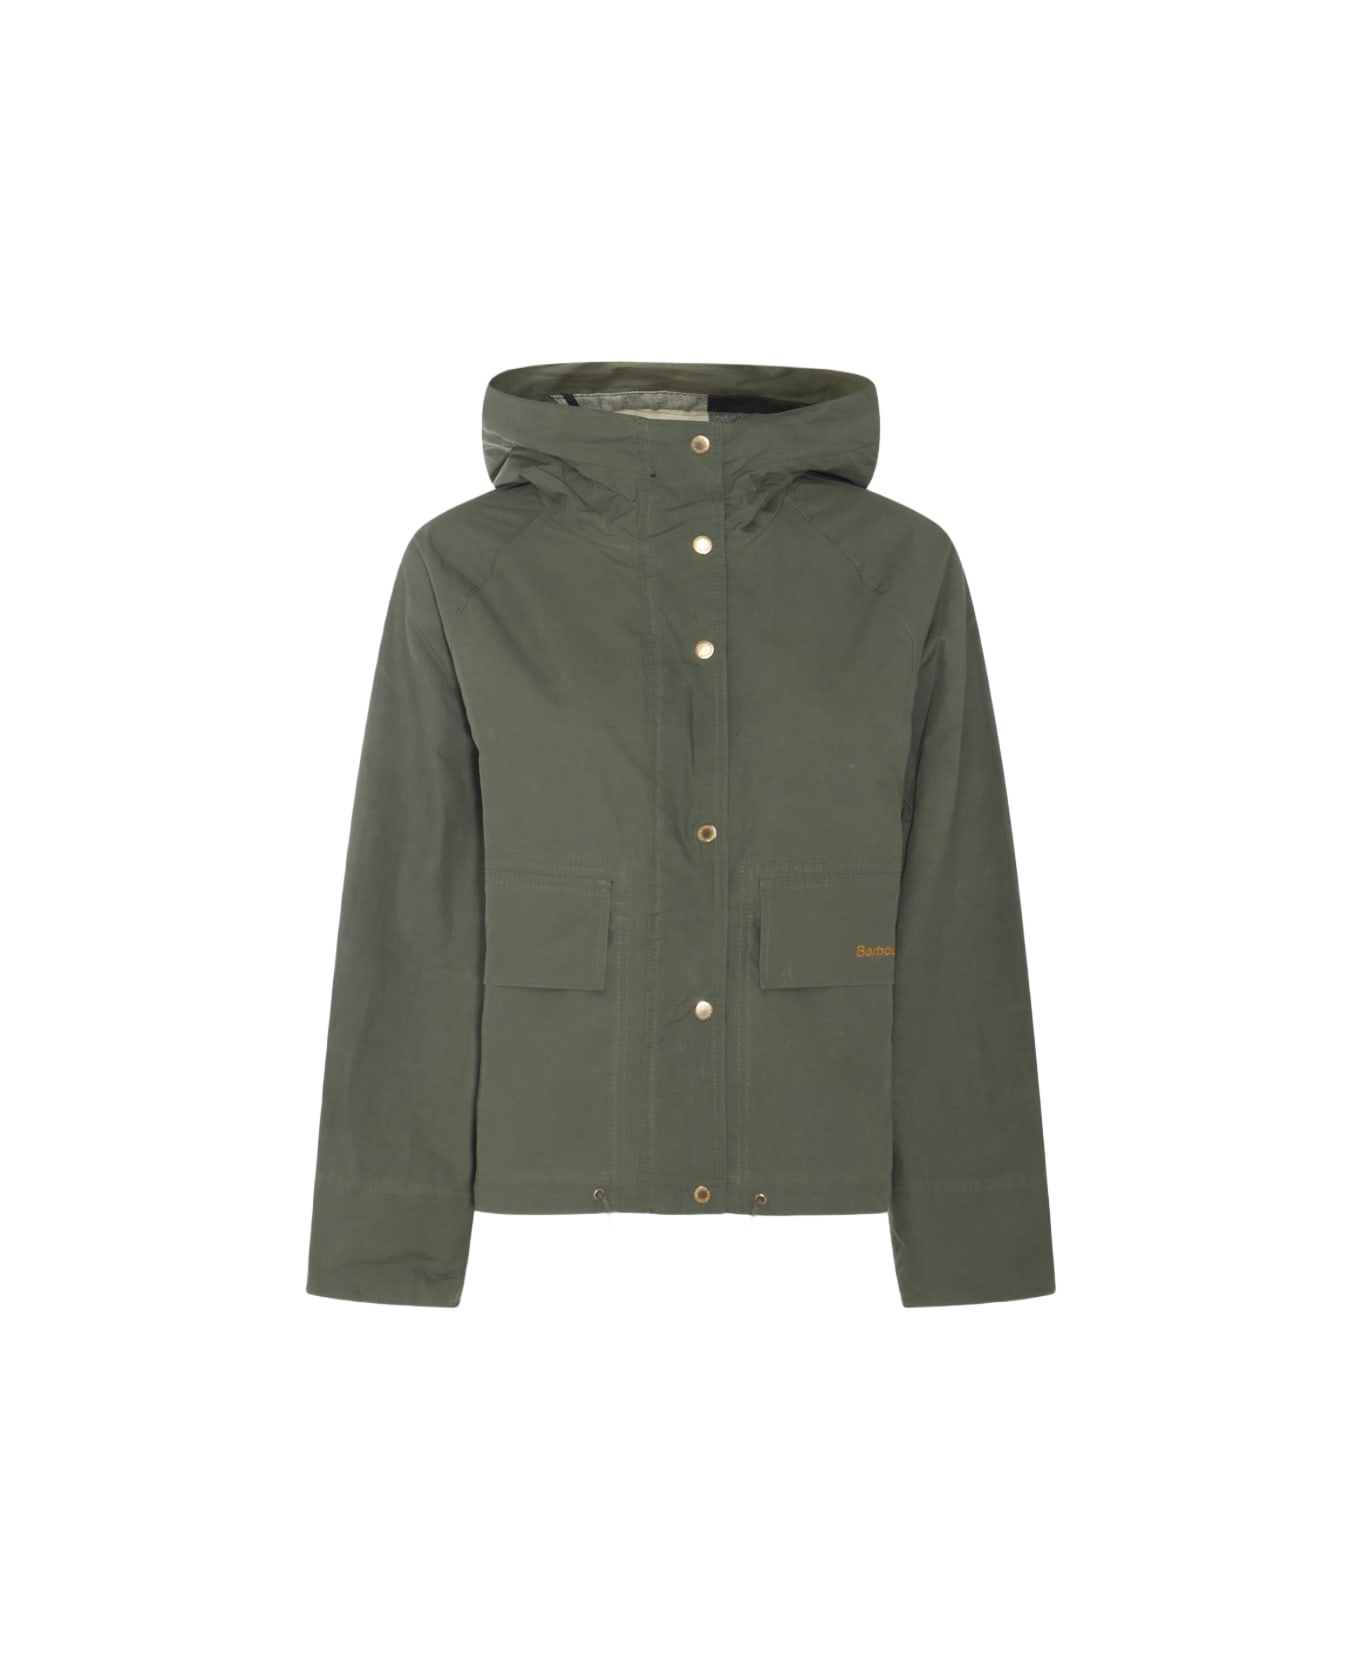 Barbour Army Cotton Casual Jacket - ARMY GREEN ジャケット